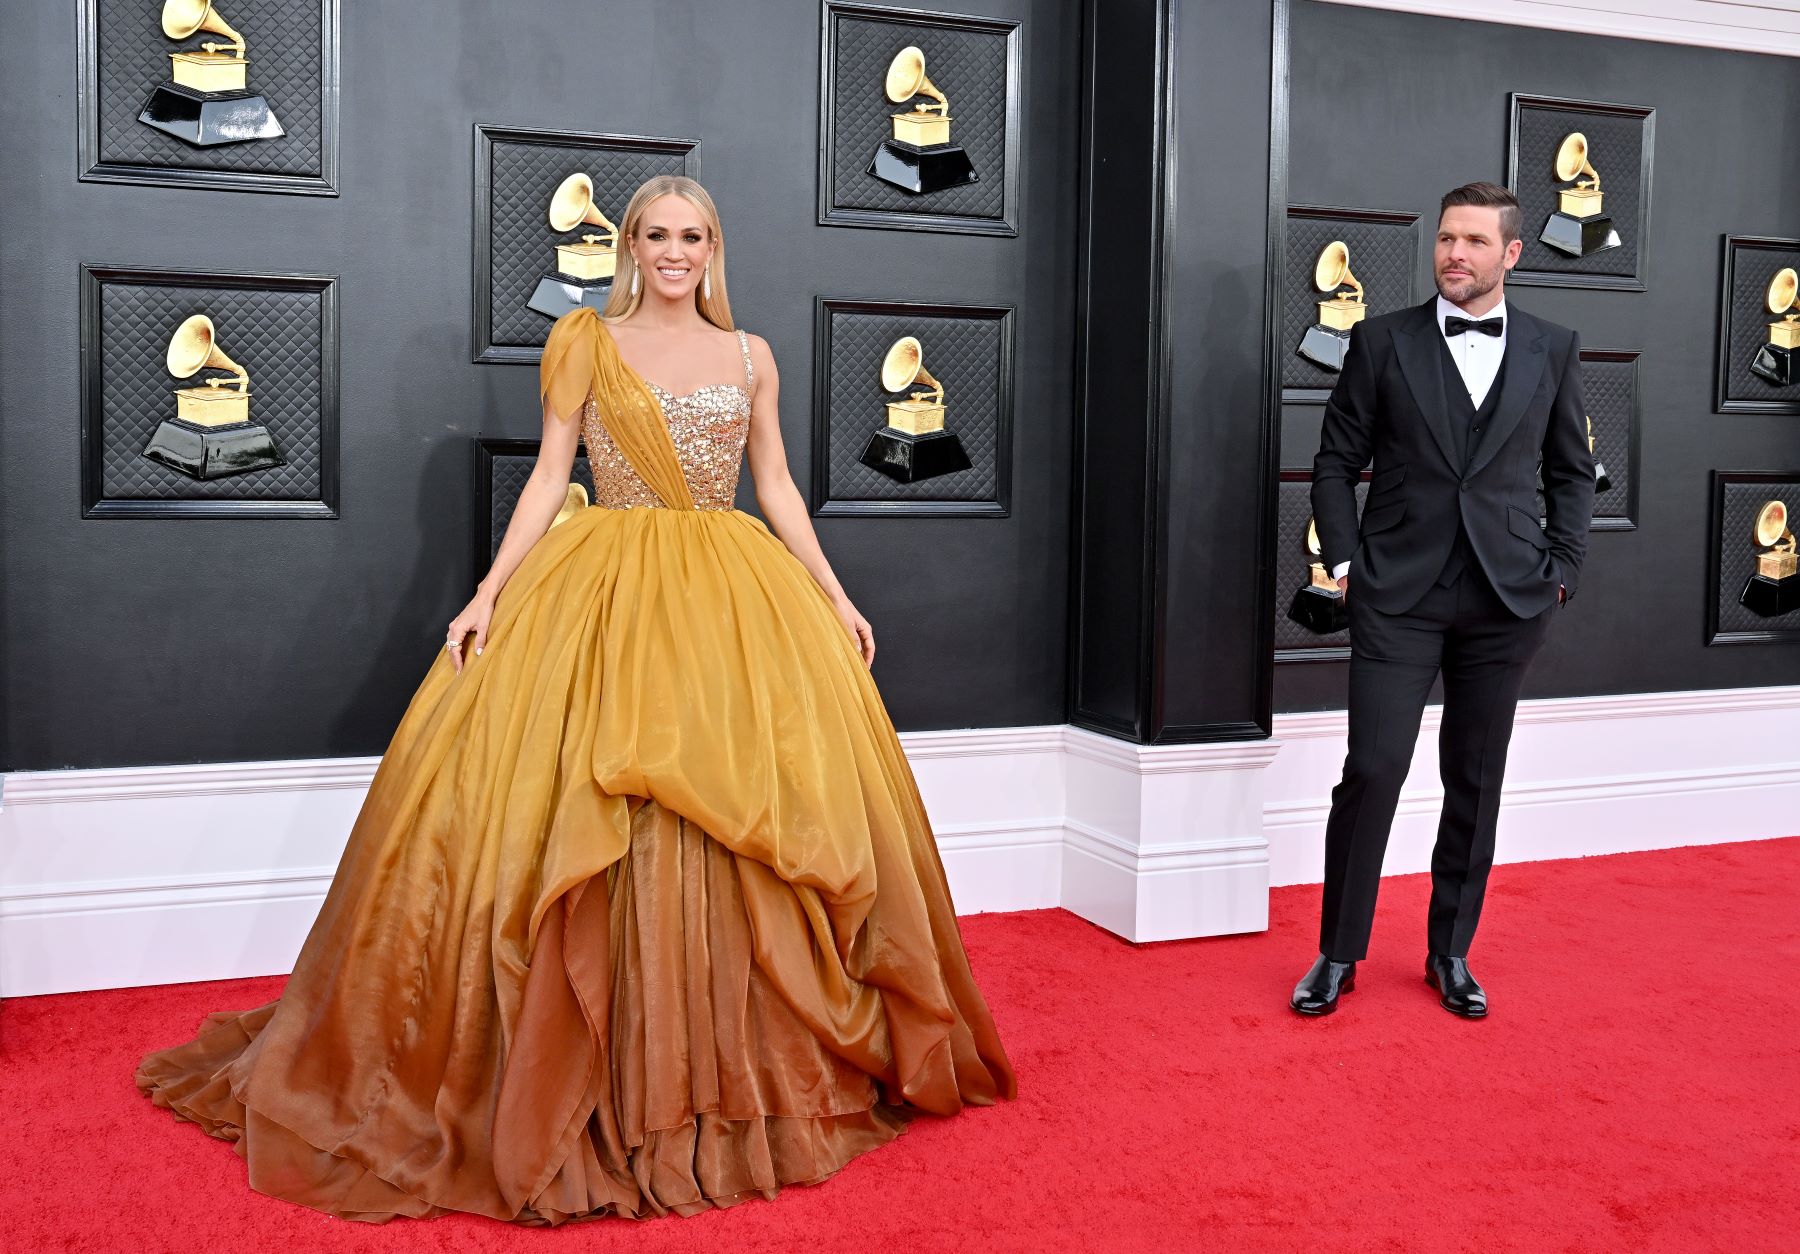 Carrie Underwood Nearly Passed on Her ‘Massive’ Ballgown for the 2022 Grammy Awards